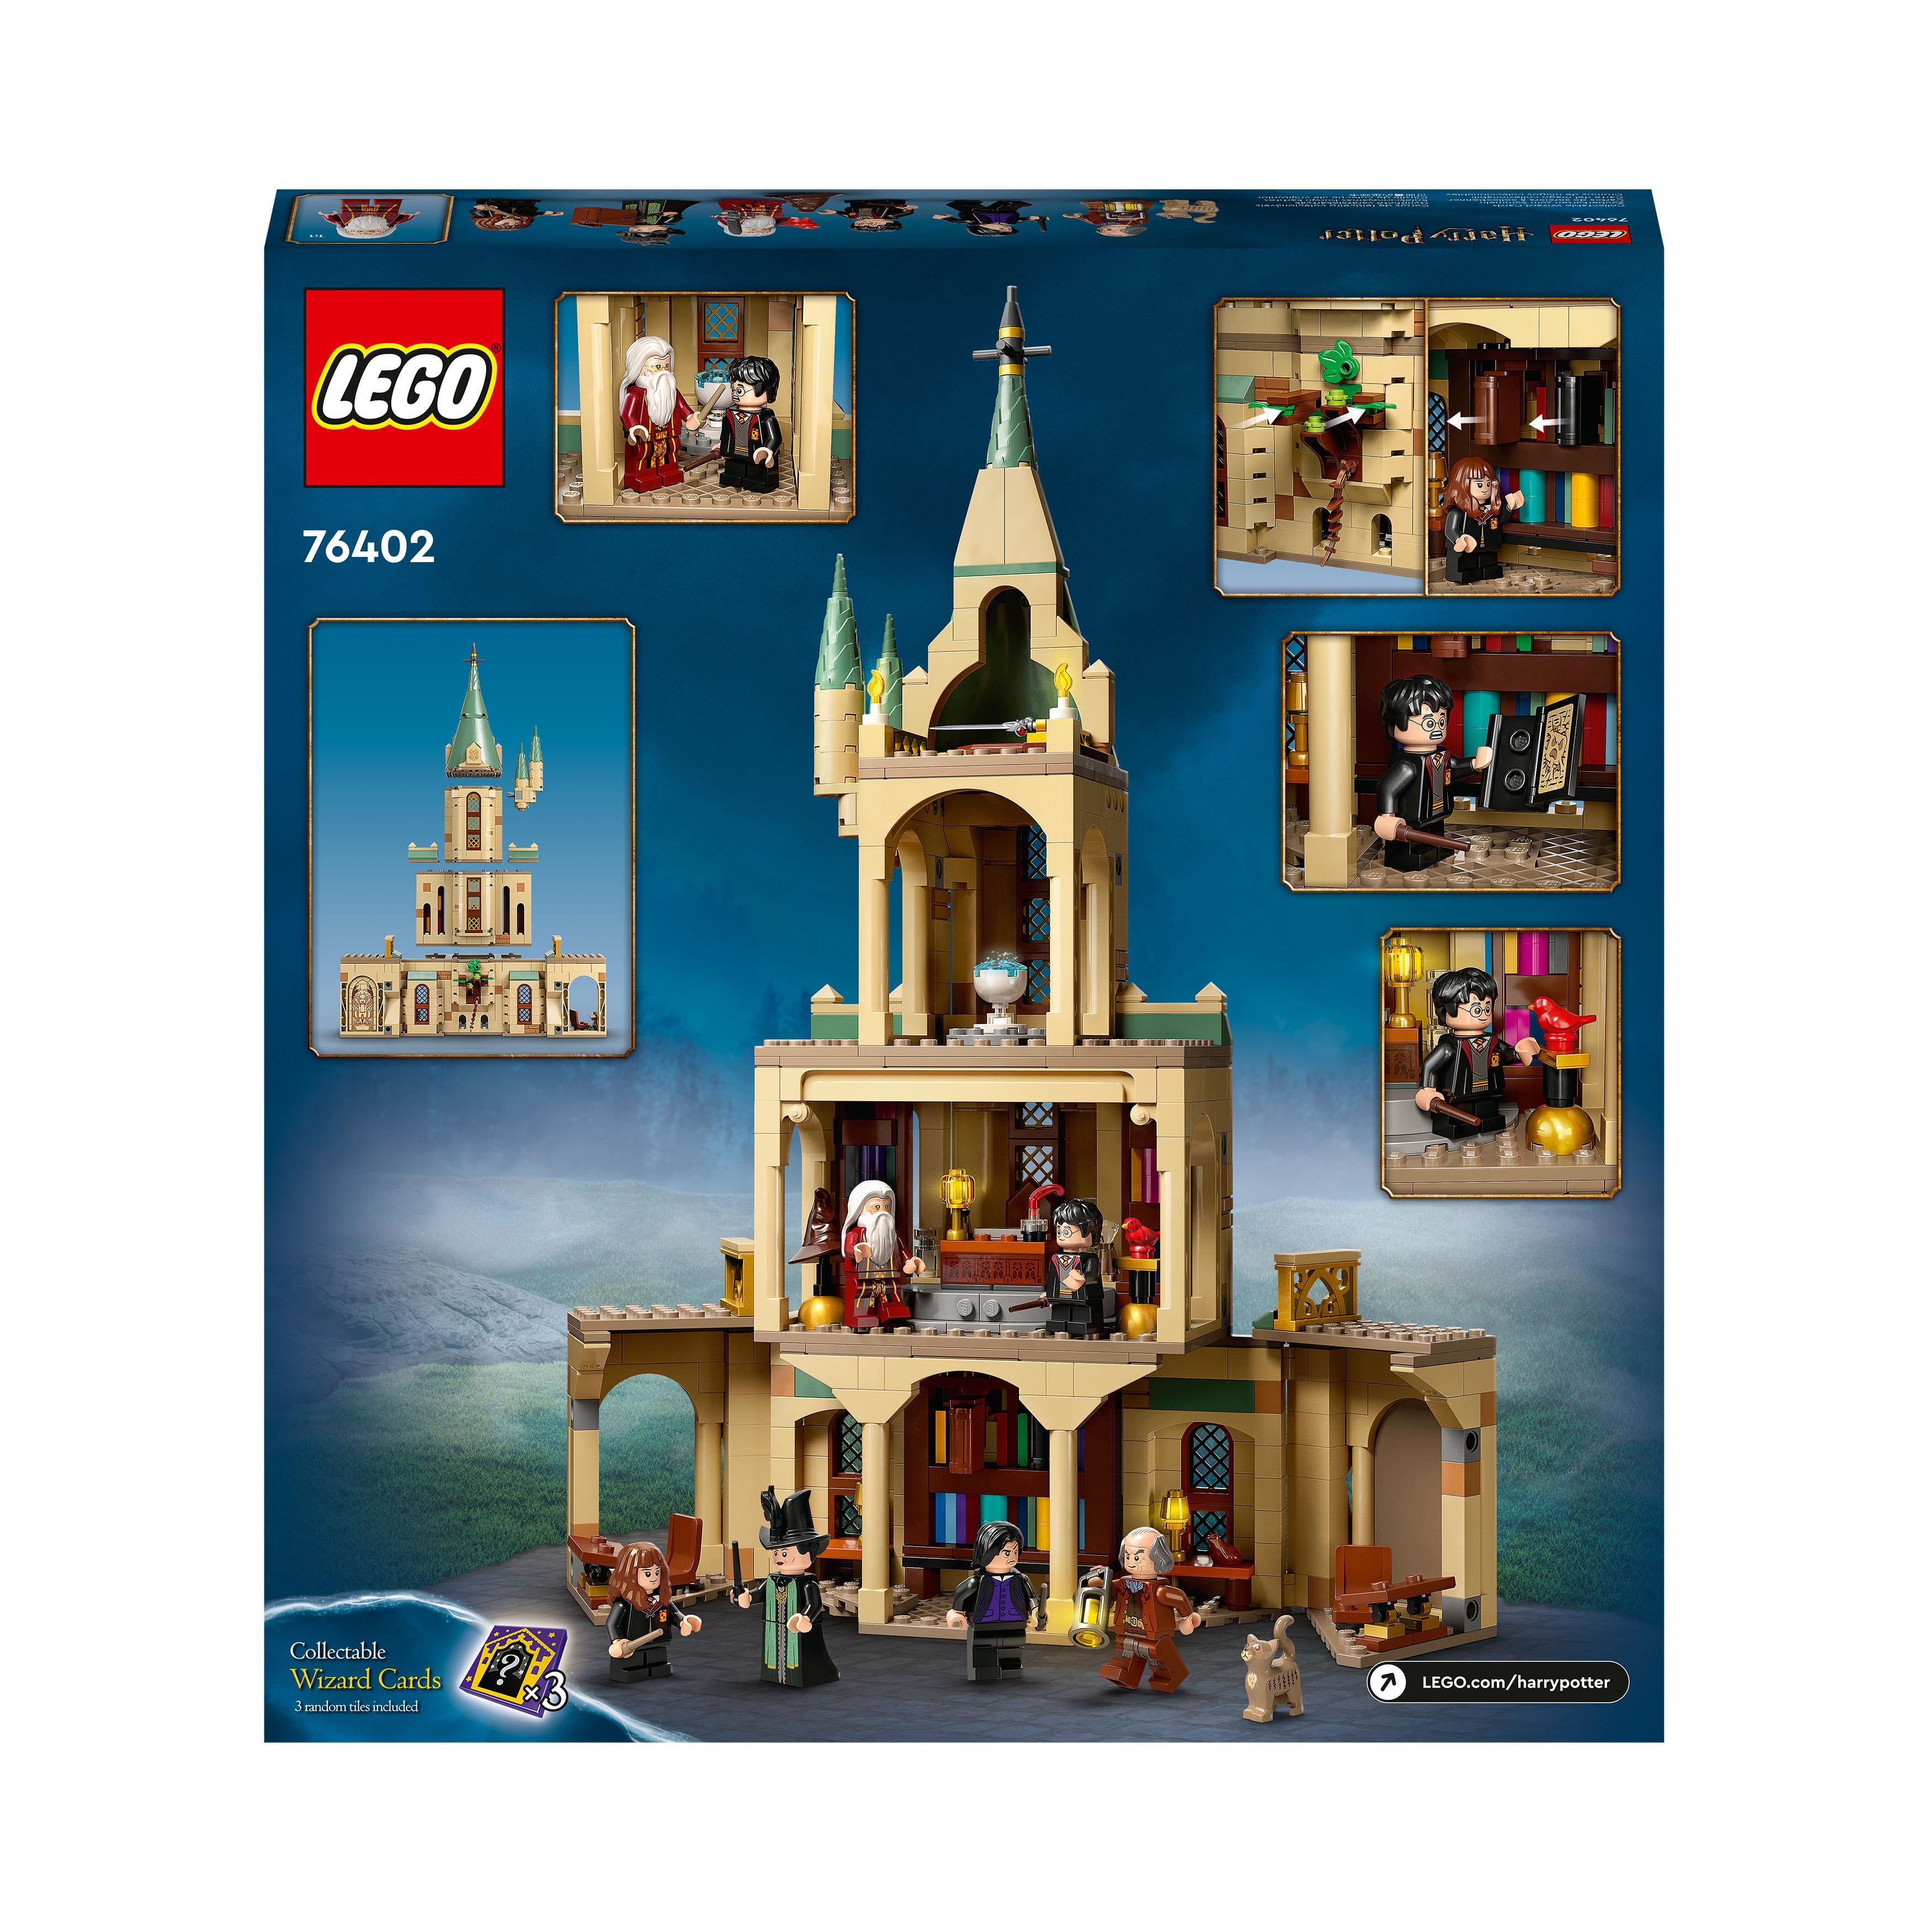 LEGO 76402 Harry Potter Hogwarts: Dumbledore’s Office Castle Toy, Set with Sorting Hat, Sword of Gryffindor Accessories and 6 Minifigures